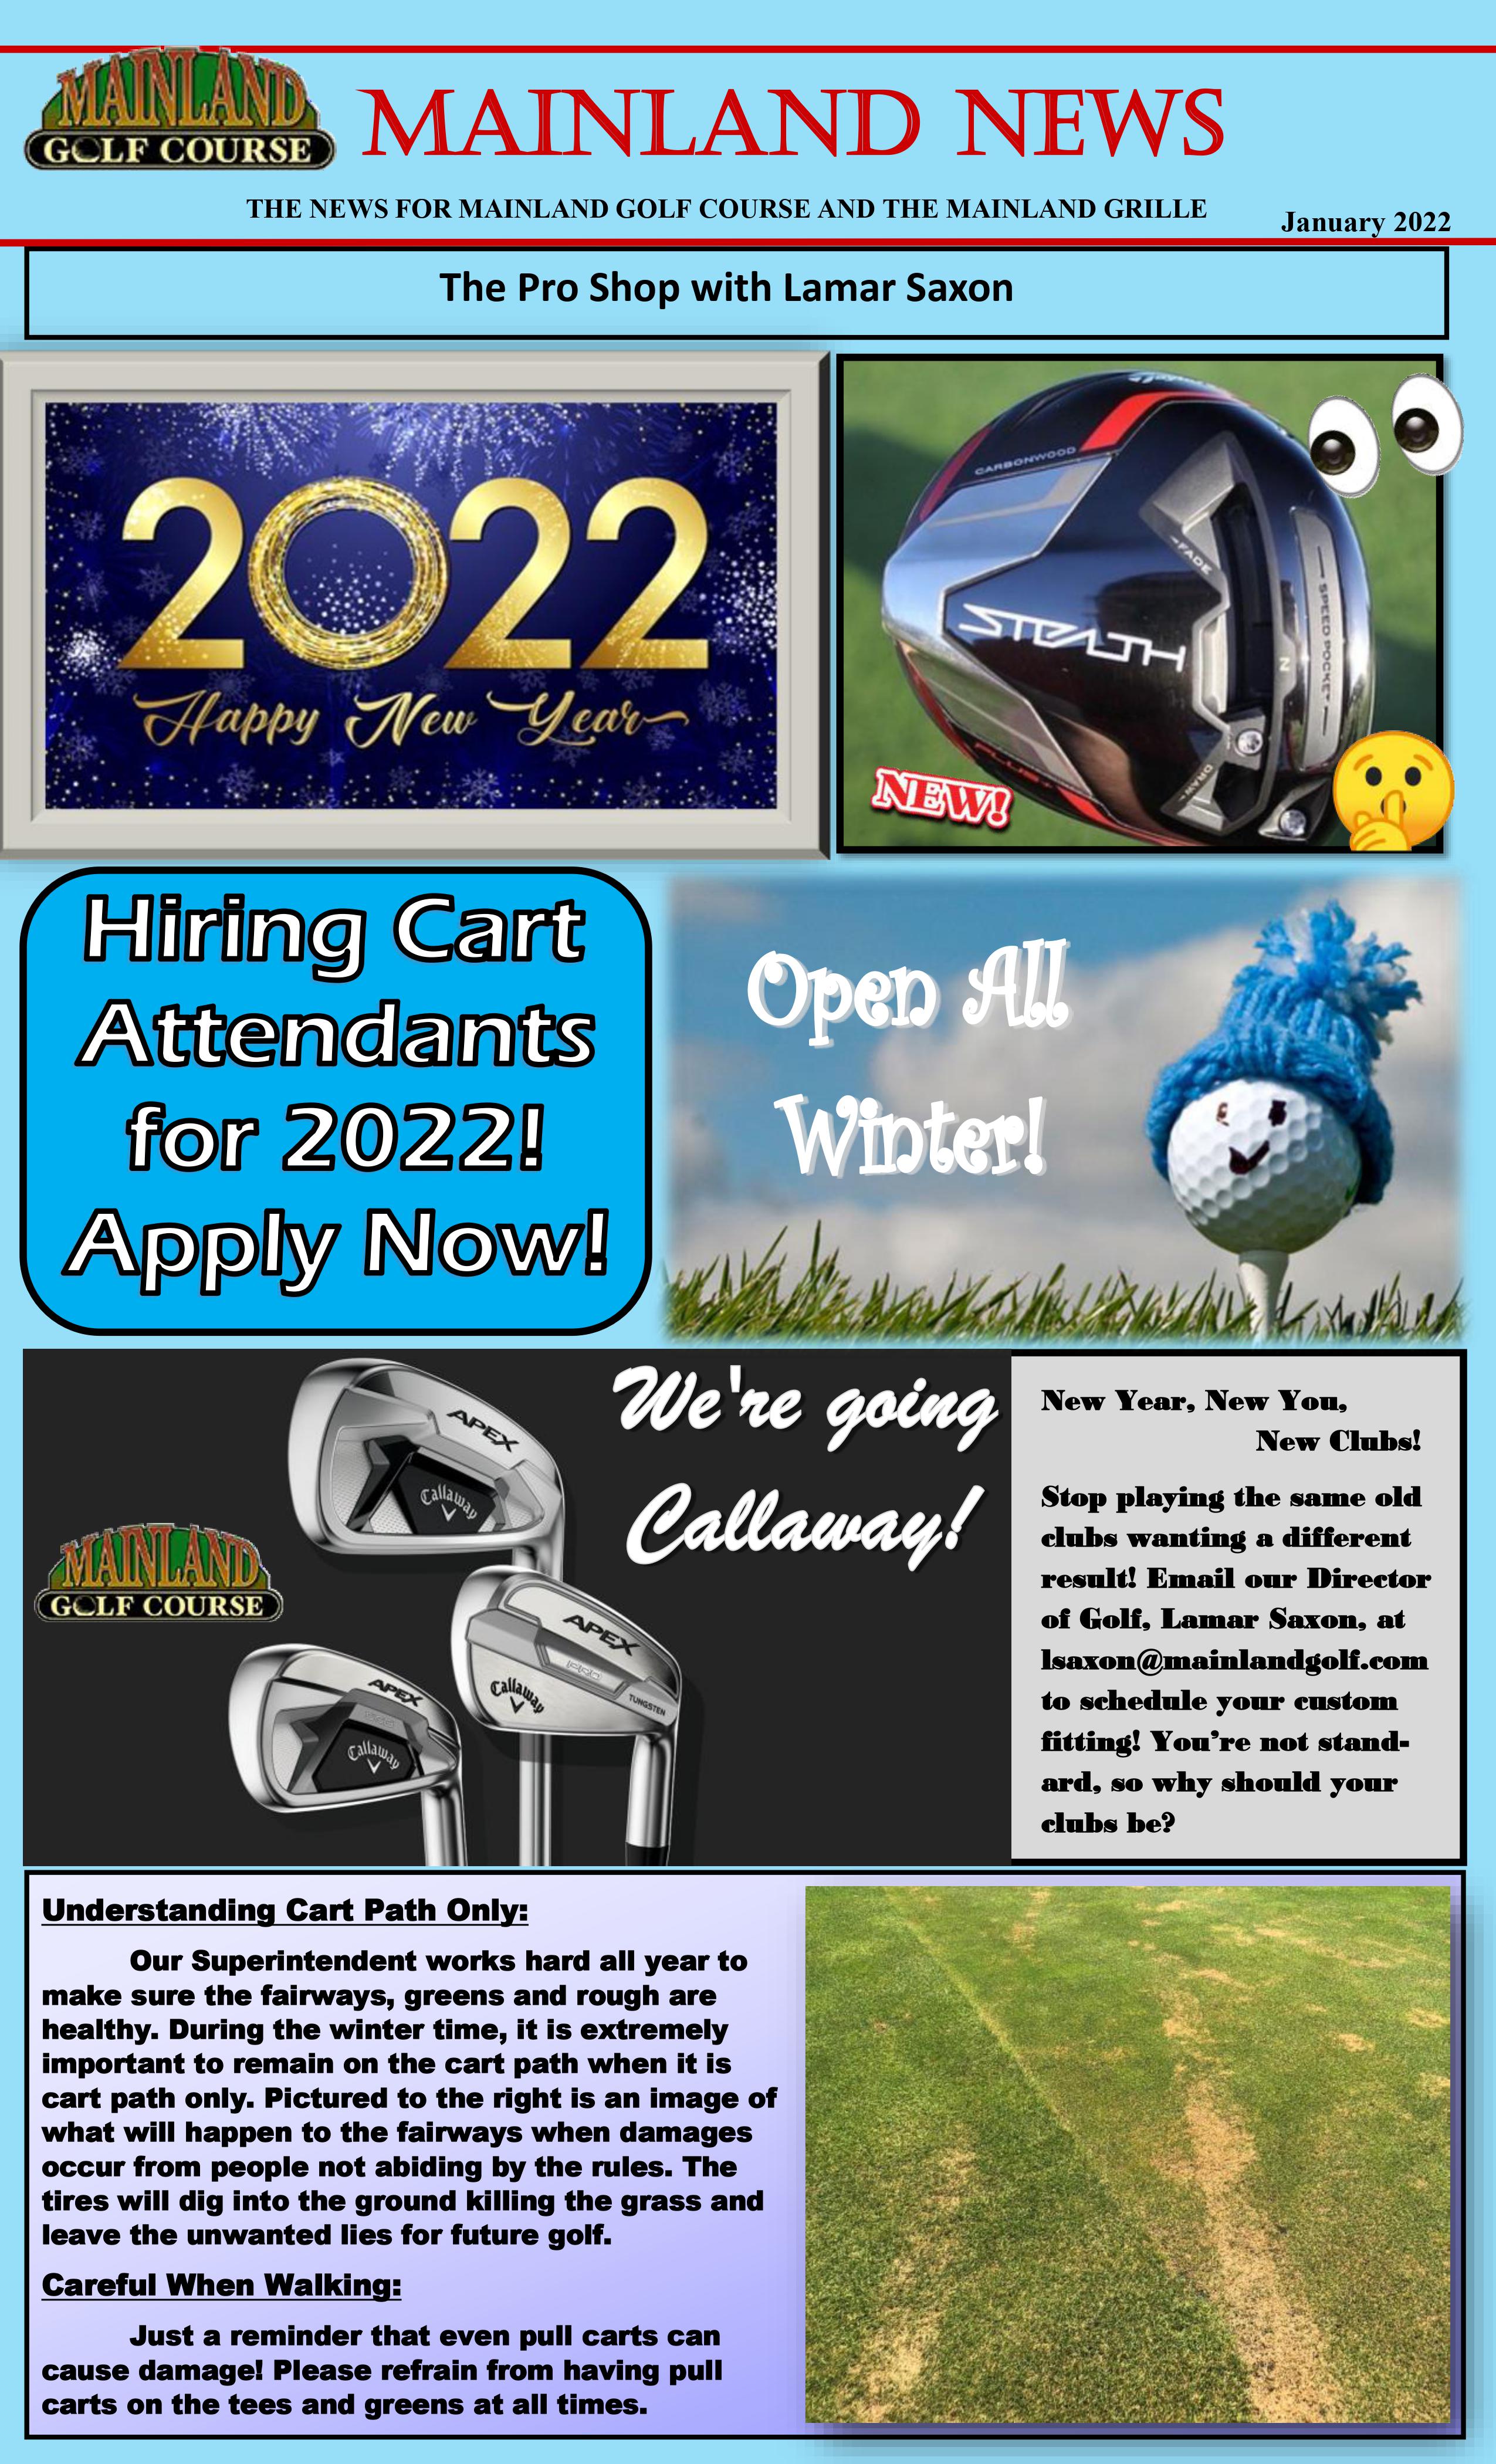 January 2022 Newsletter page 1